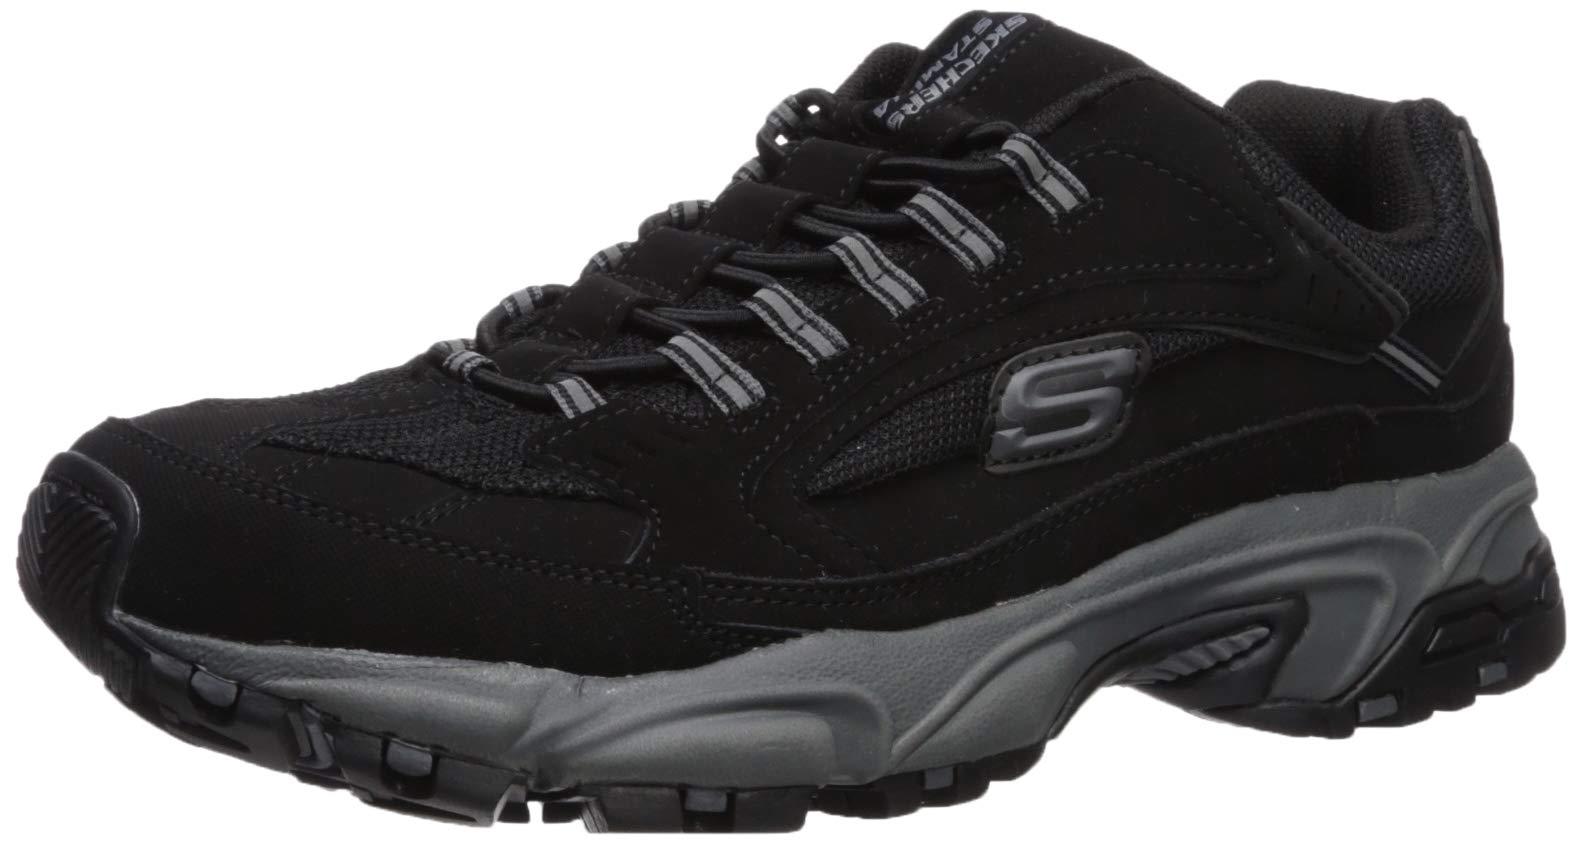 Skechers Leather S Stamina Woodmer Stamina Woodmer in Black/Charcoal (Black)  for Men - Save 39% - Lyst